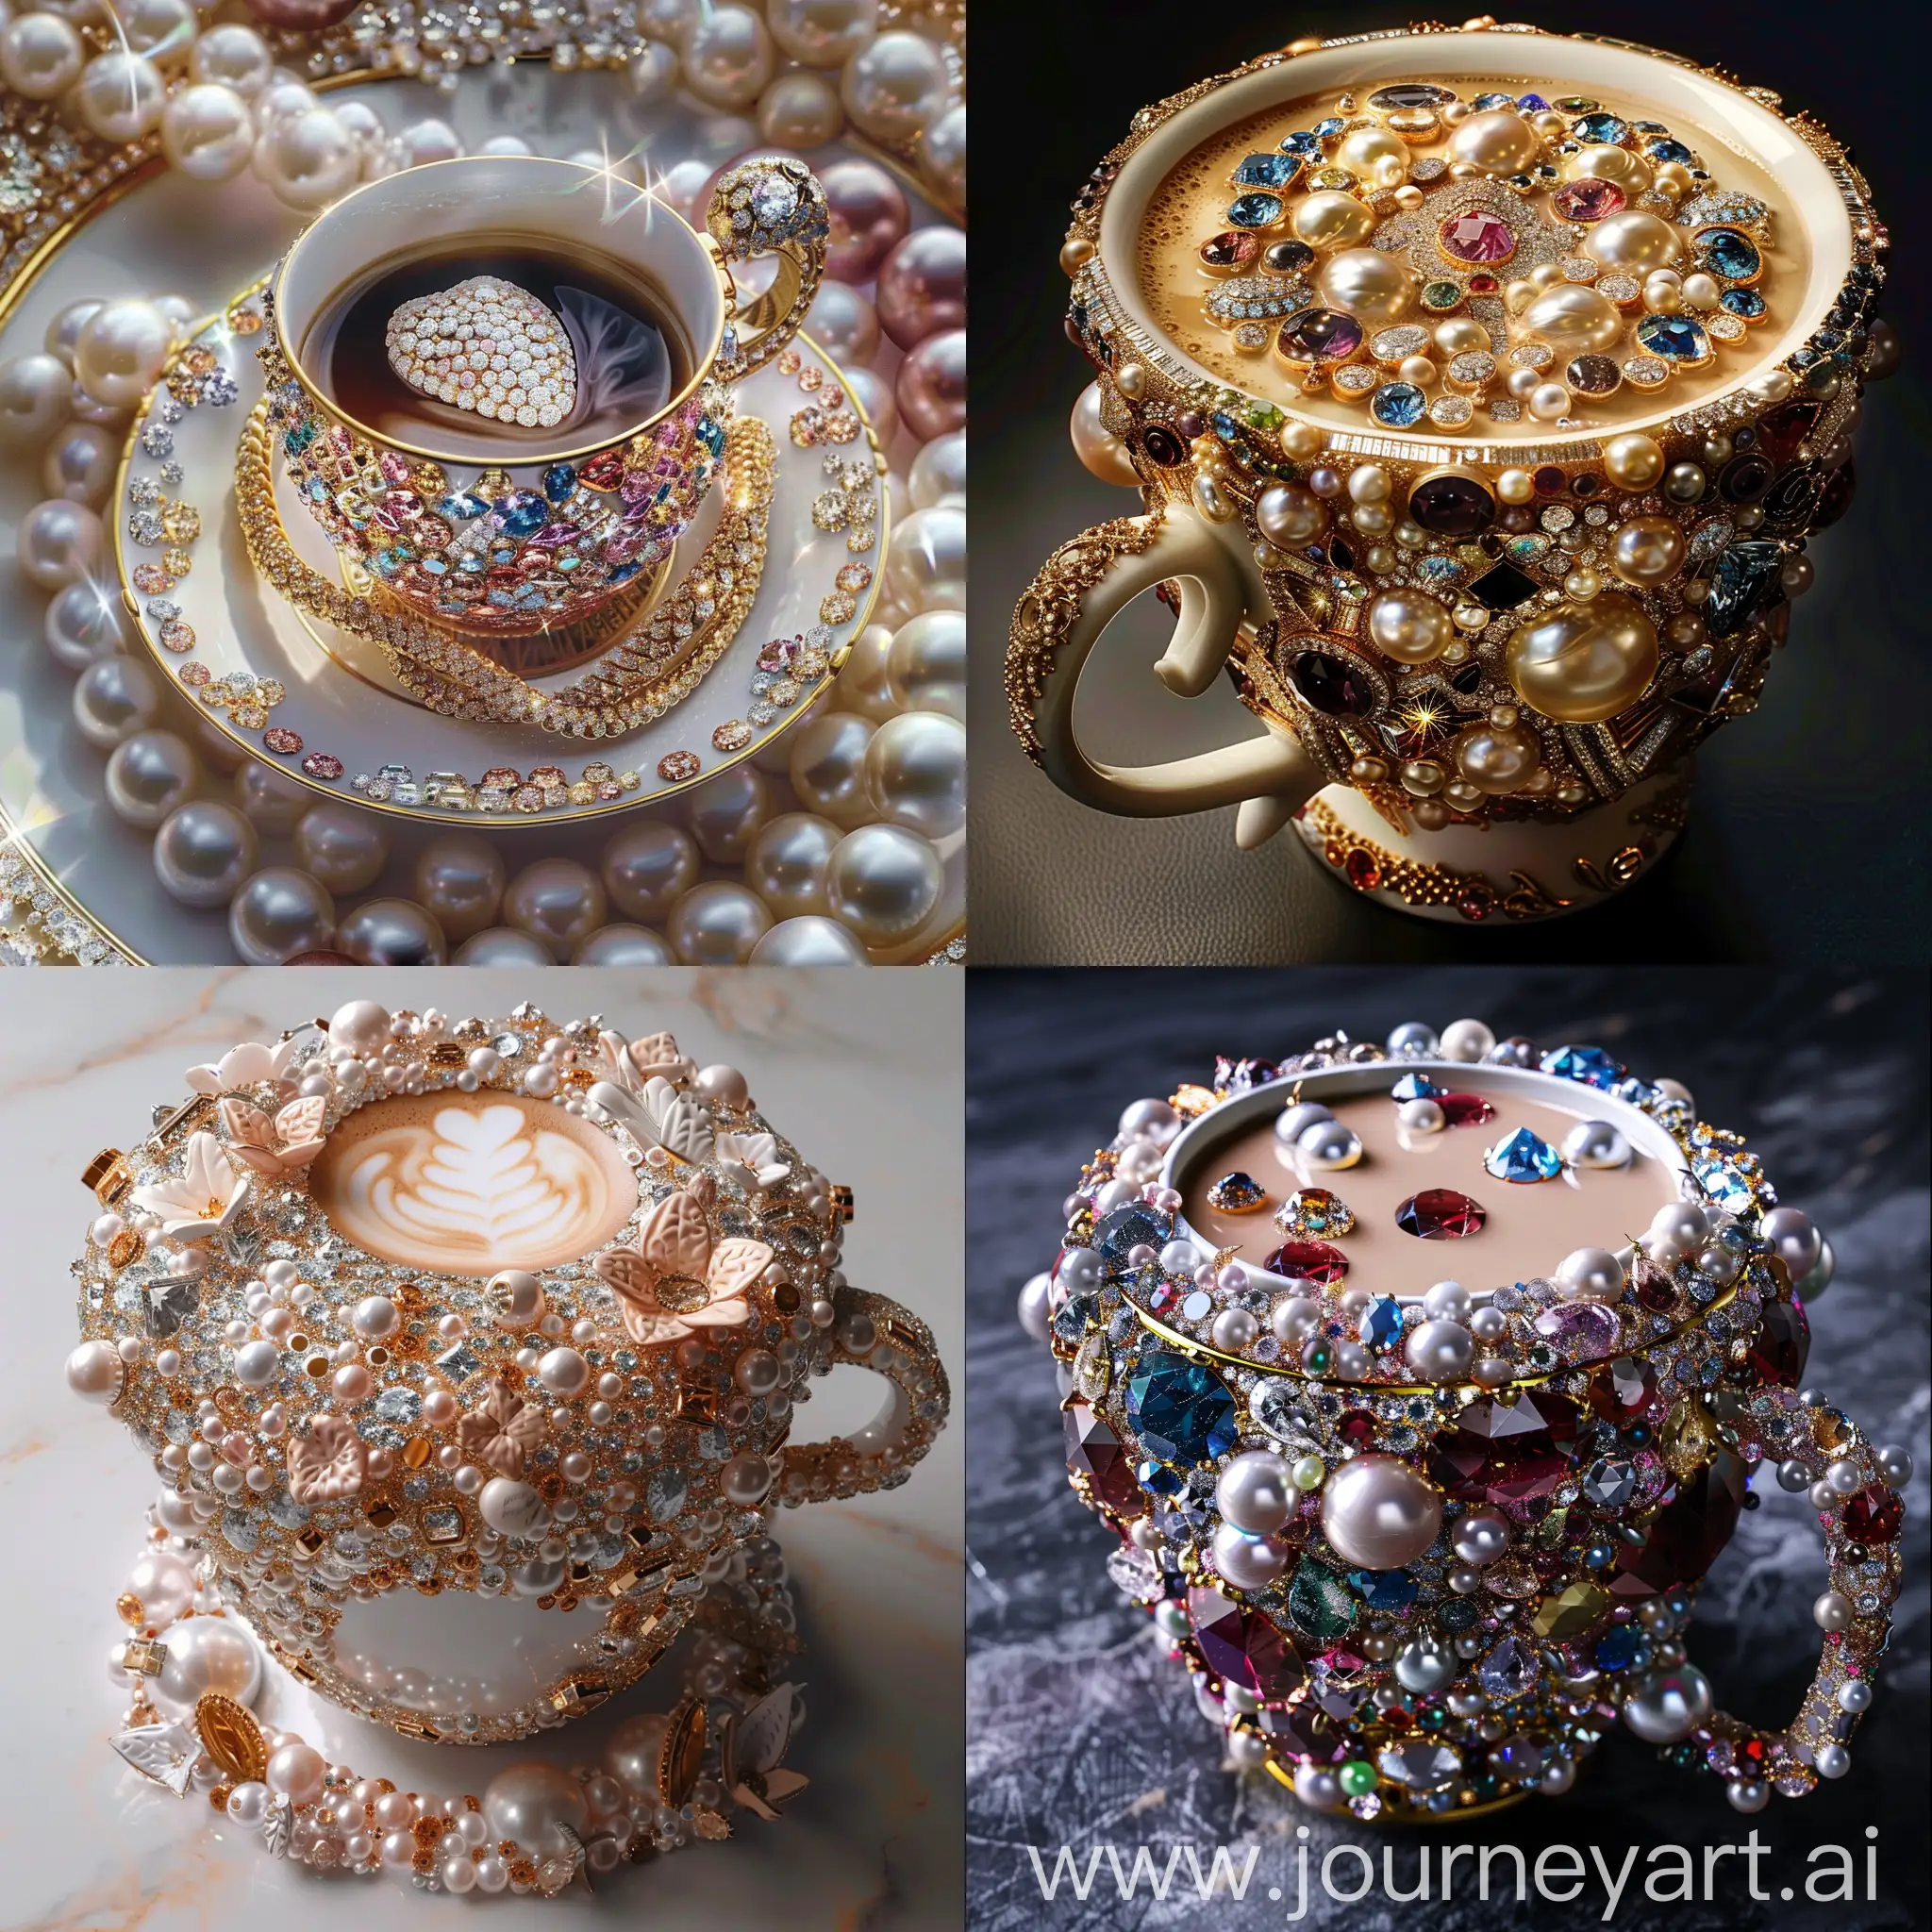 Luxurious-Coffee-Cup-Adorned-with-Jewels-and-Diamonds-in-Iconic-Art-Style